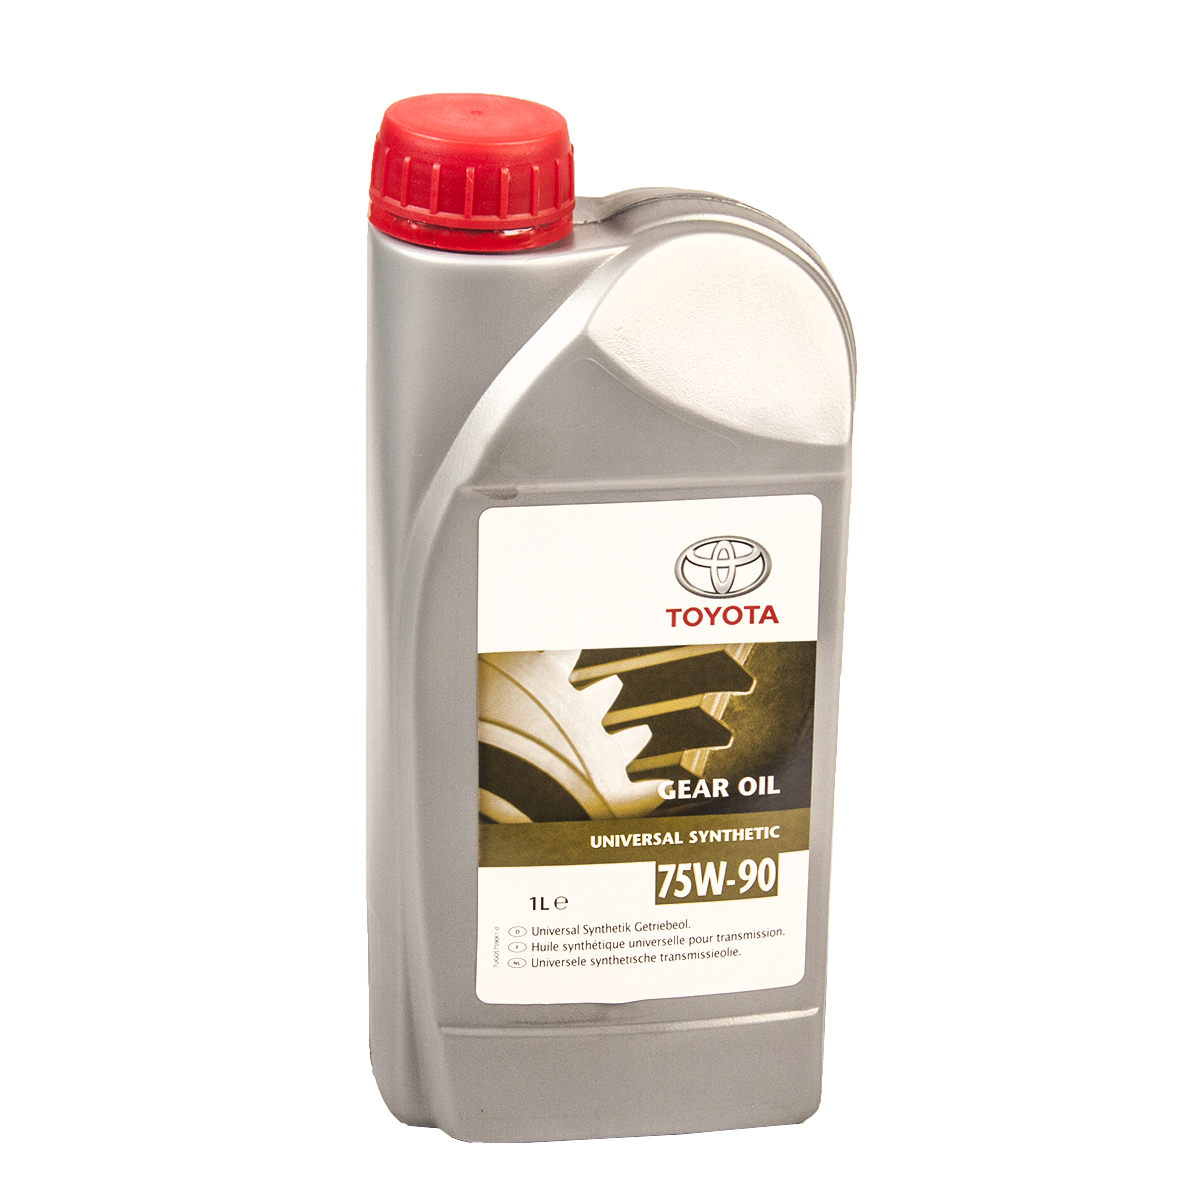 75w-90 Differential Gear Oil, API gl-5, 1л (синт.транс.масло) - Toyota 08885-81592